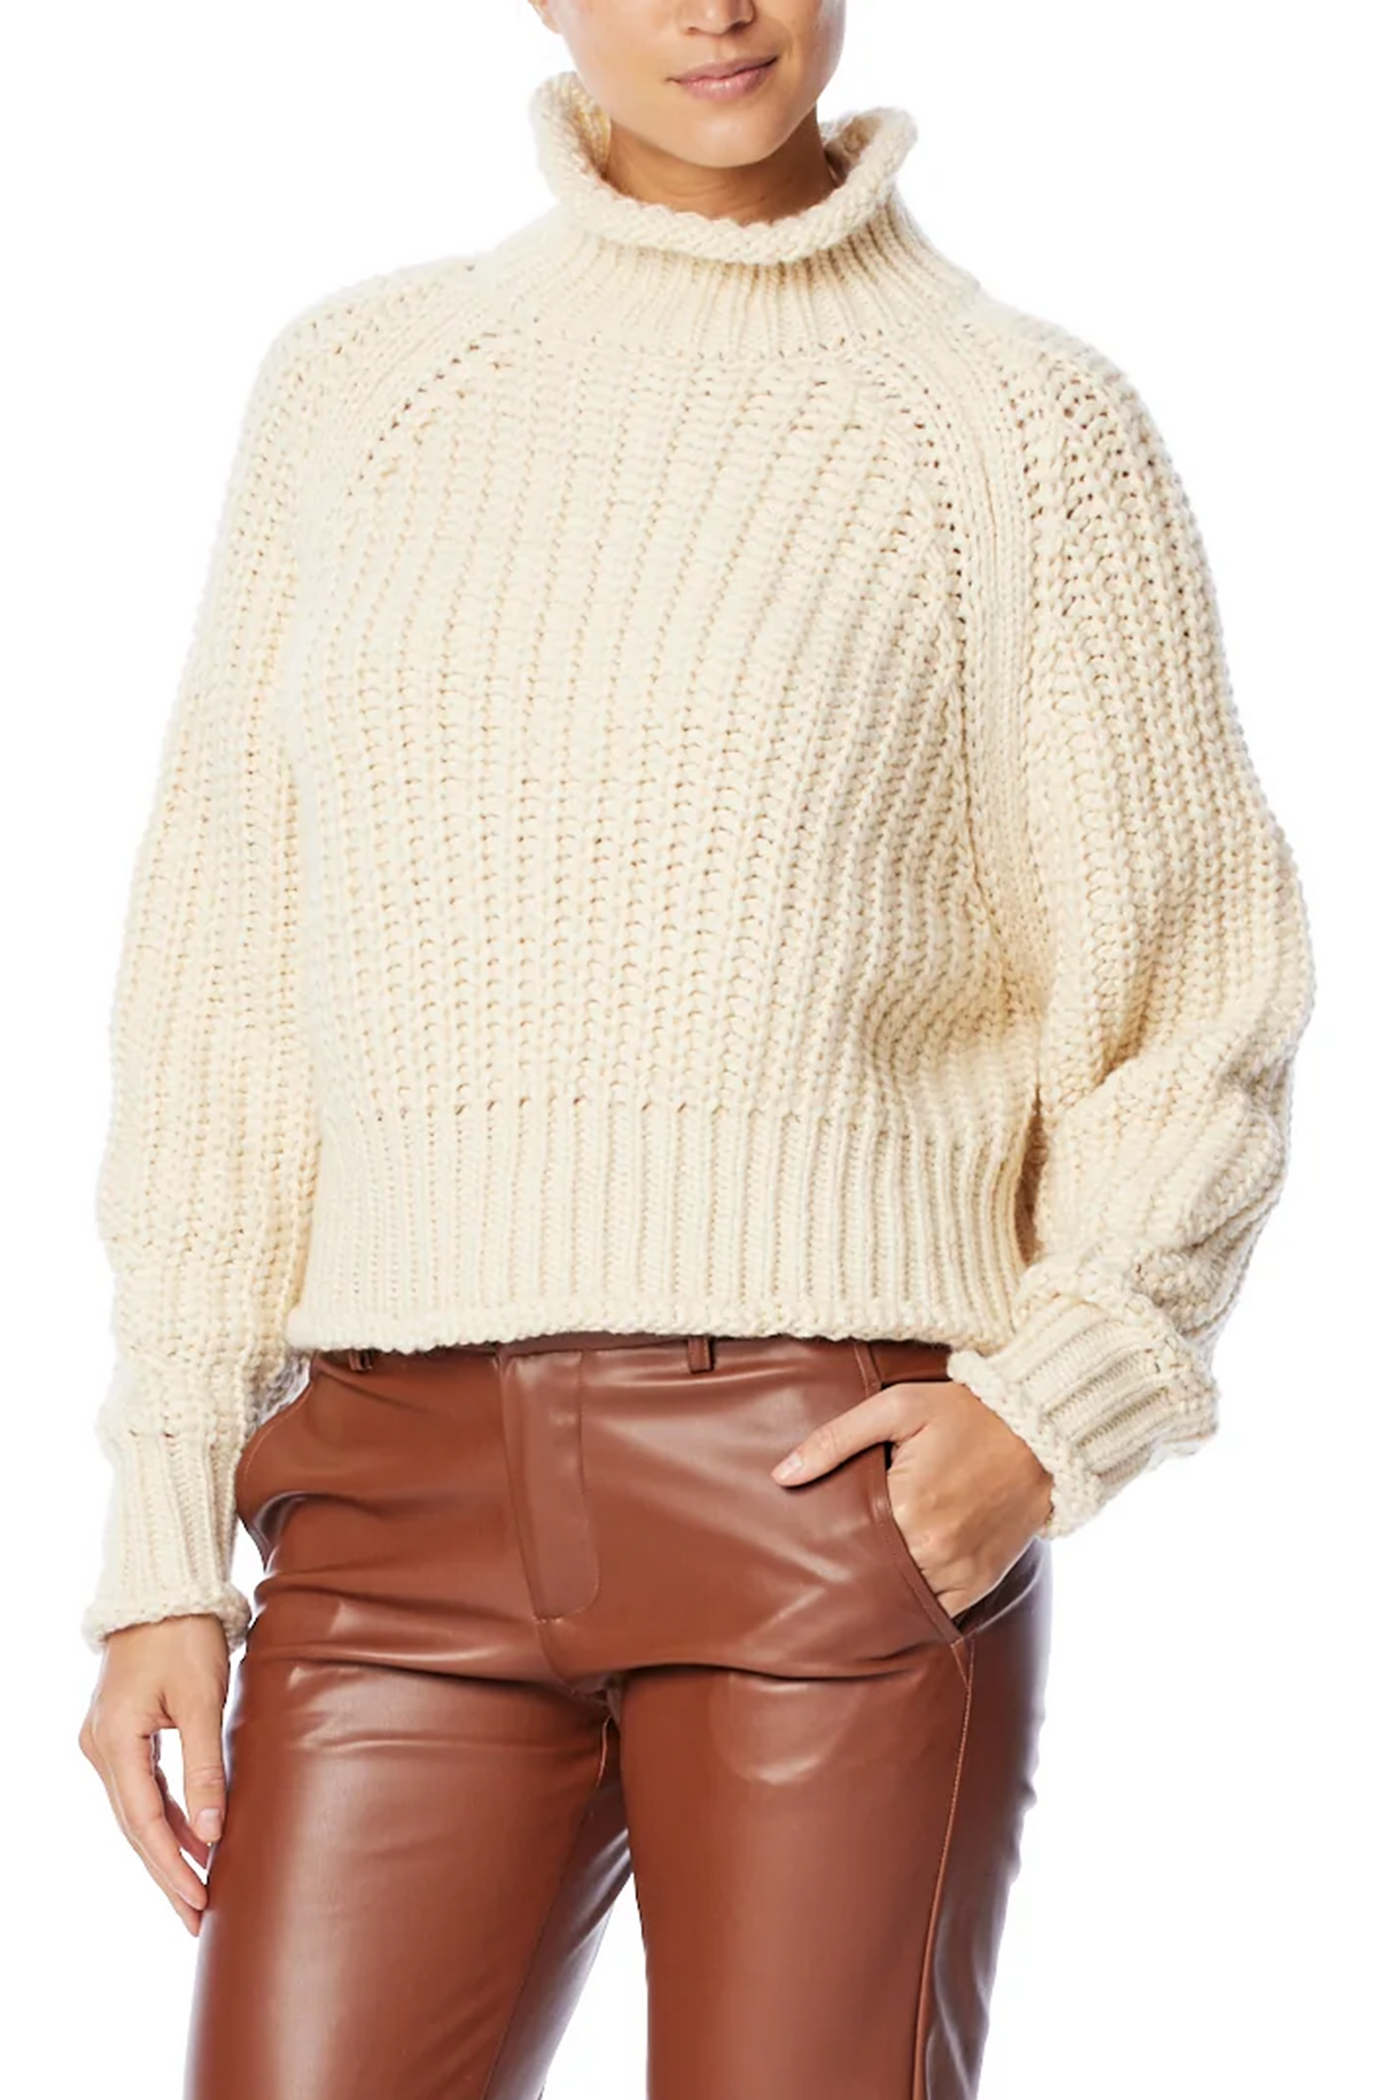 LBLC the Label: Jules Chunky Knit Sweater in Creme